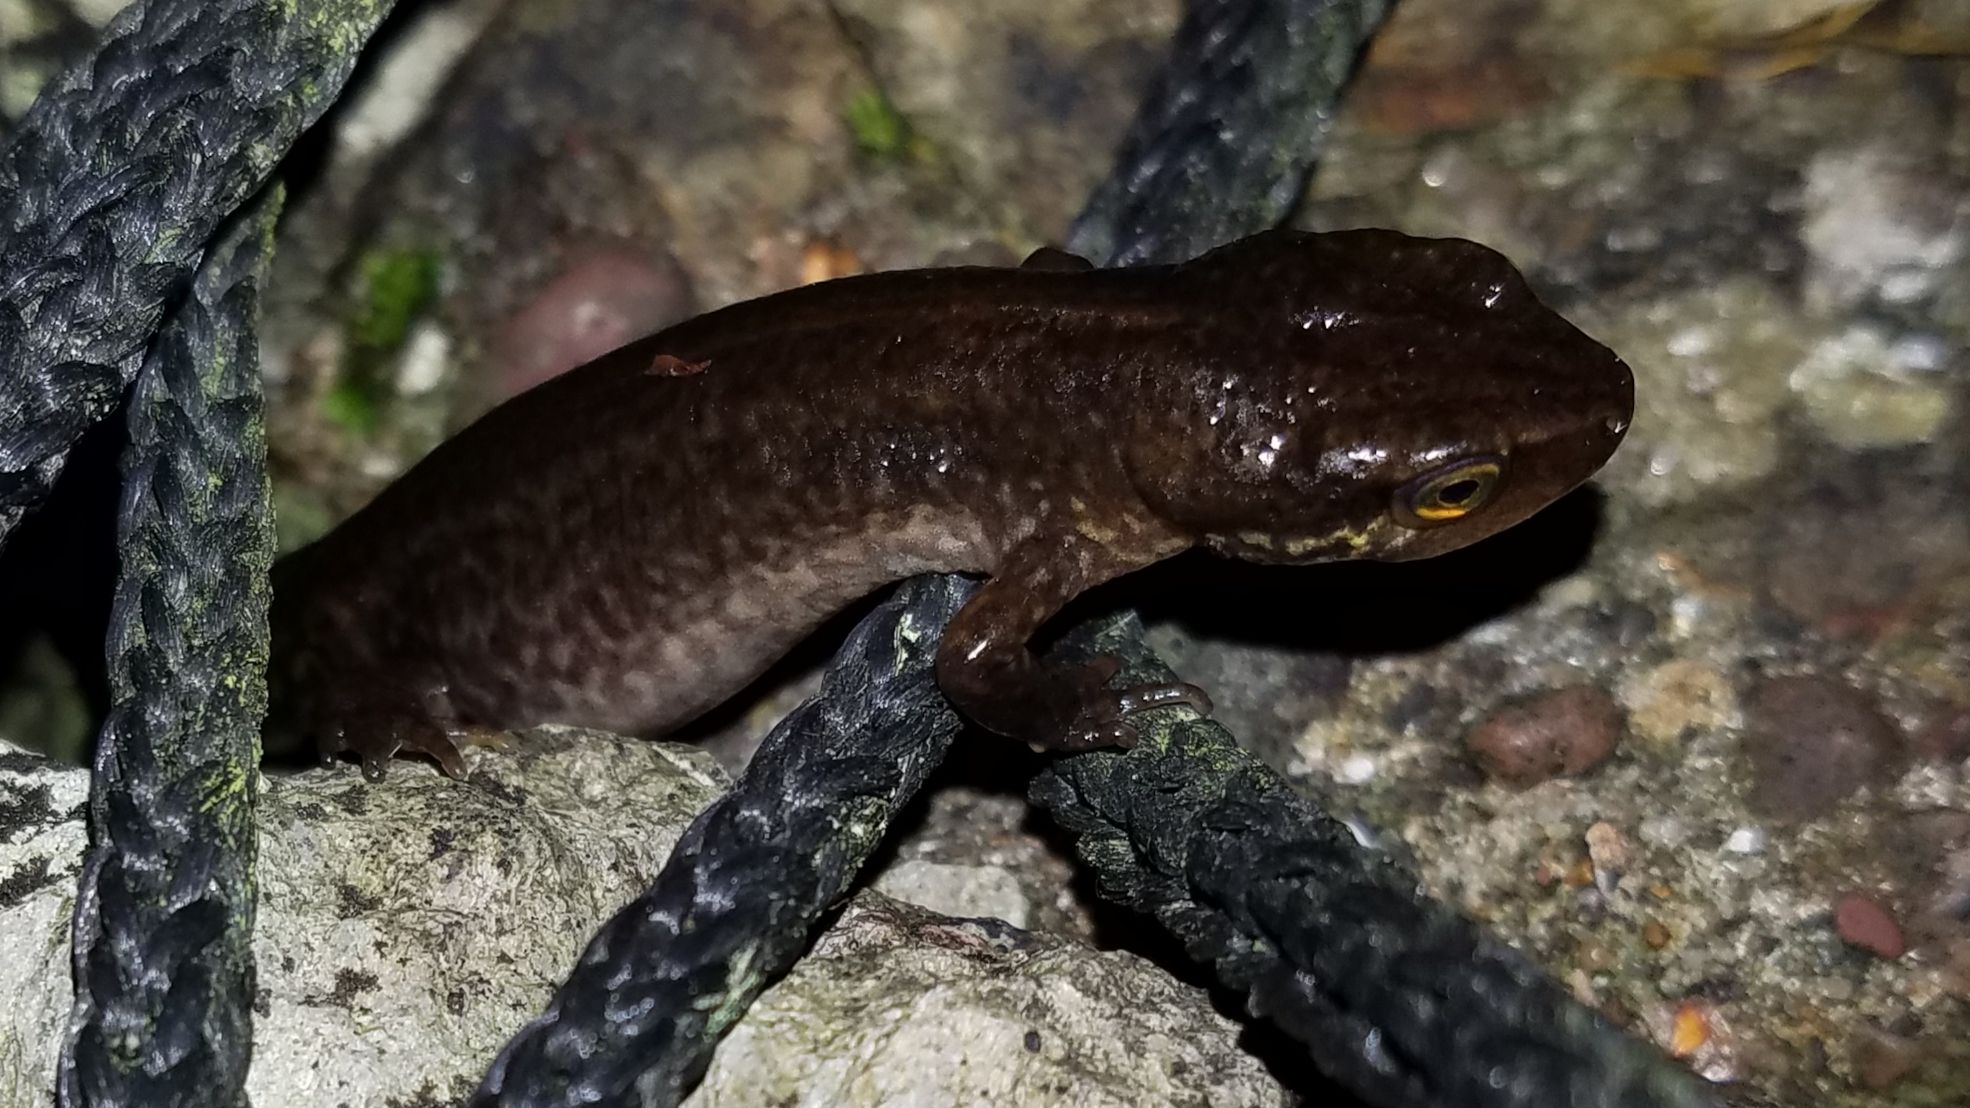 Image of a palmate newt crawling over some pebbles.